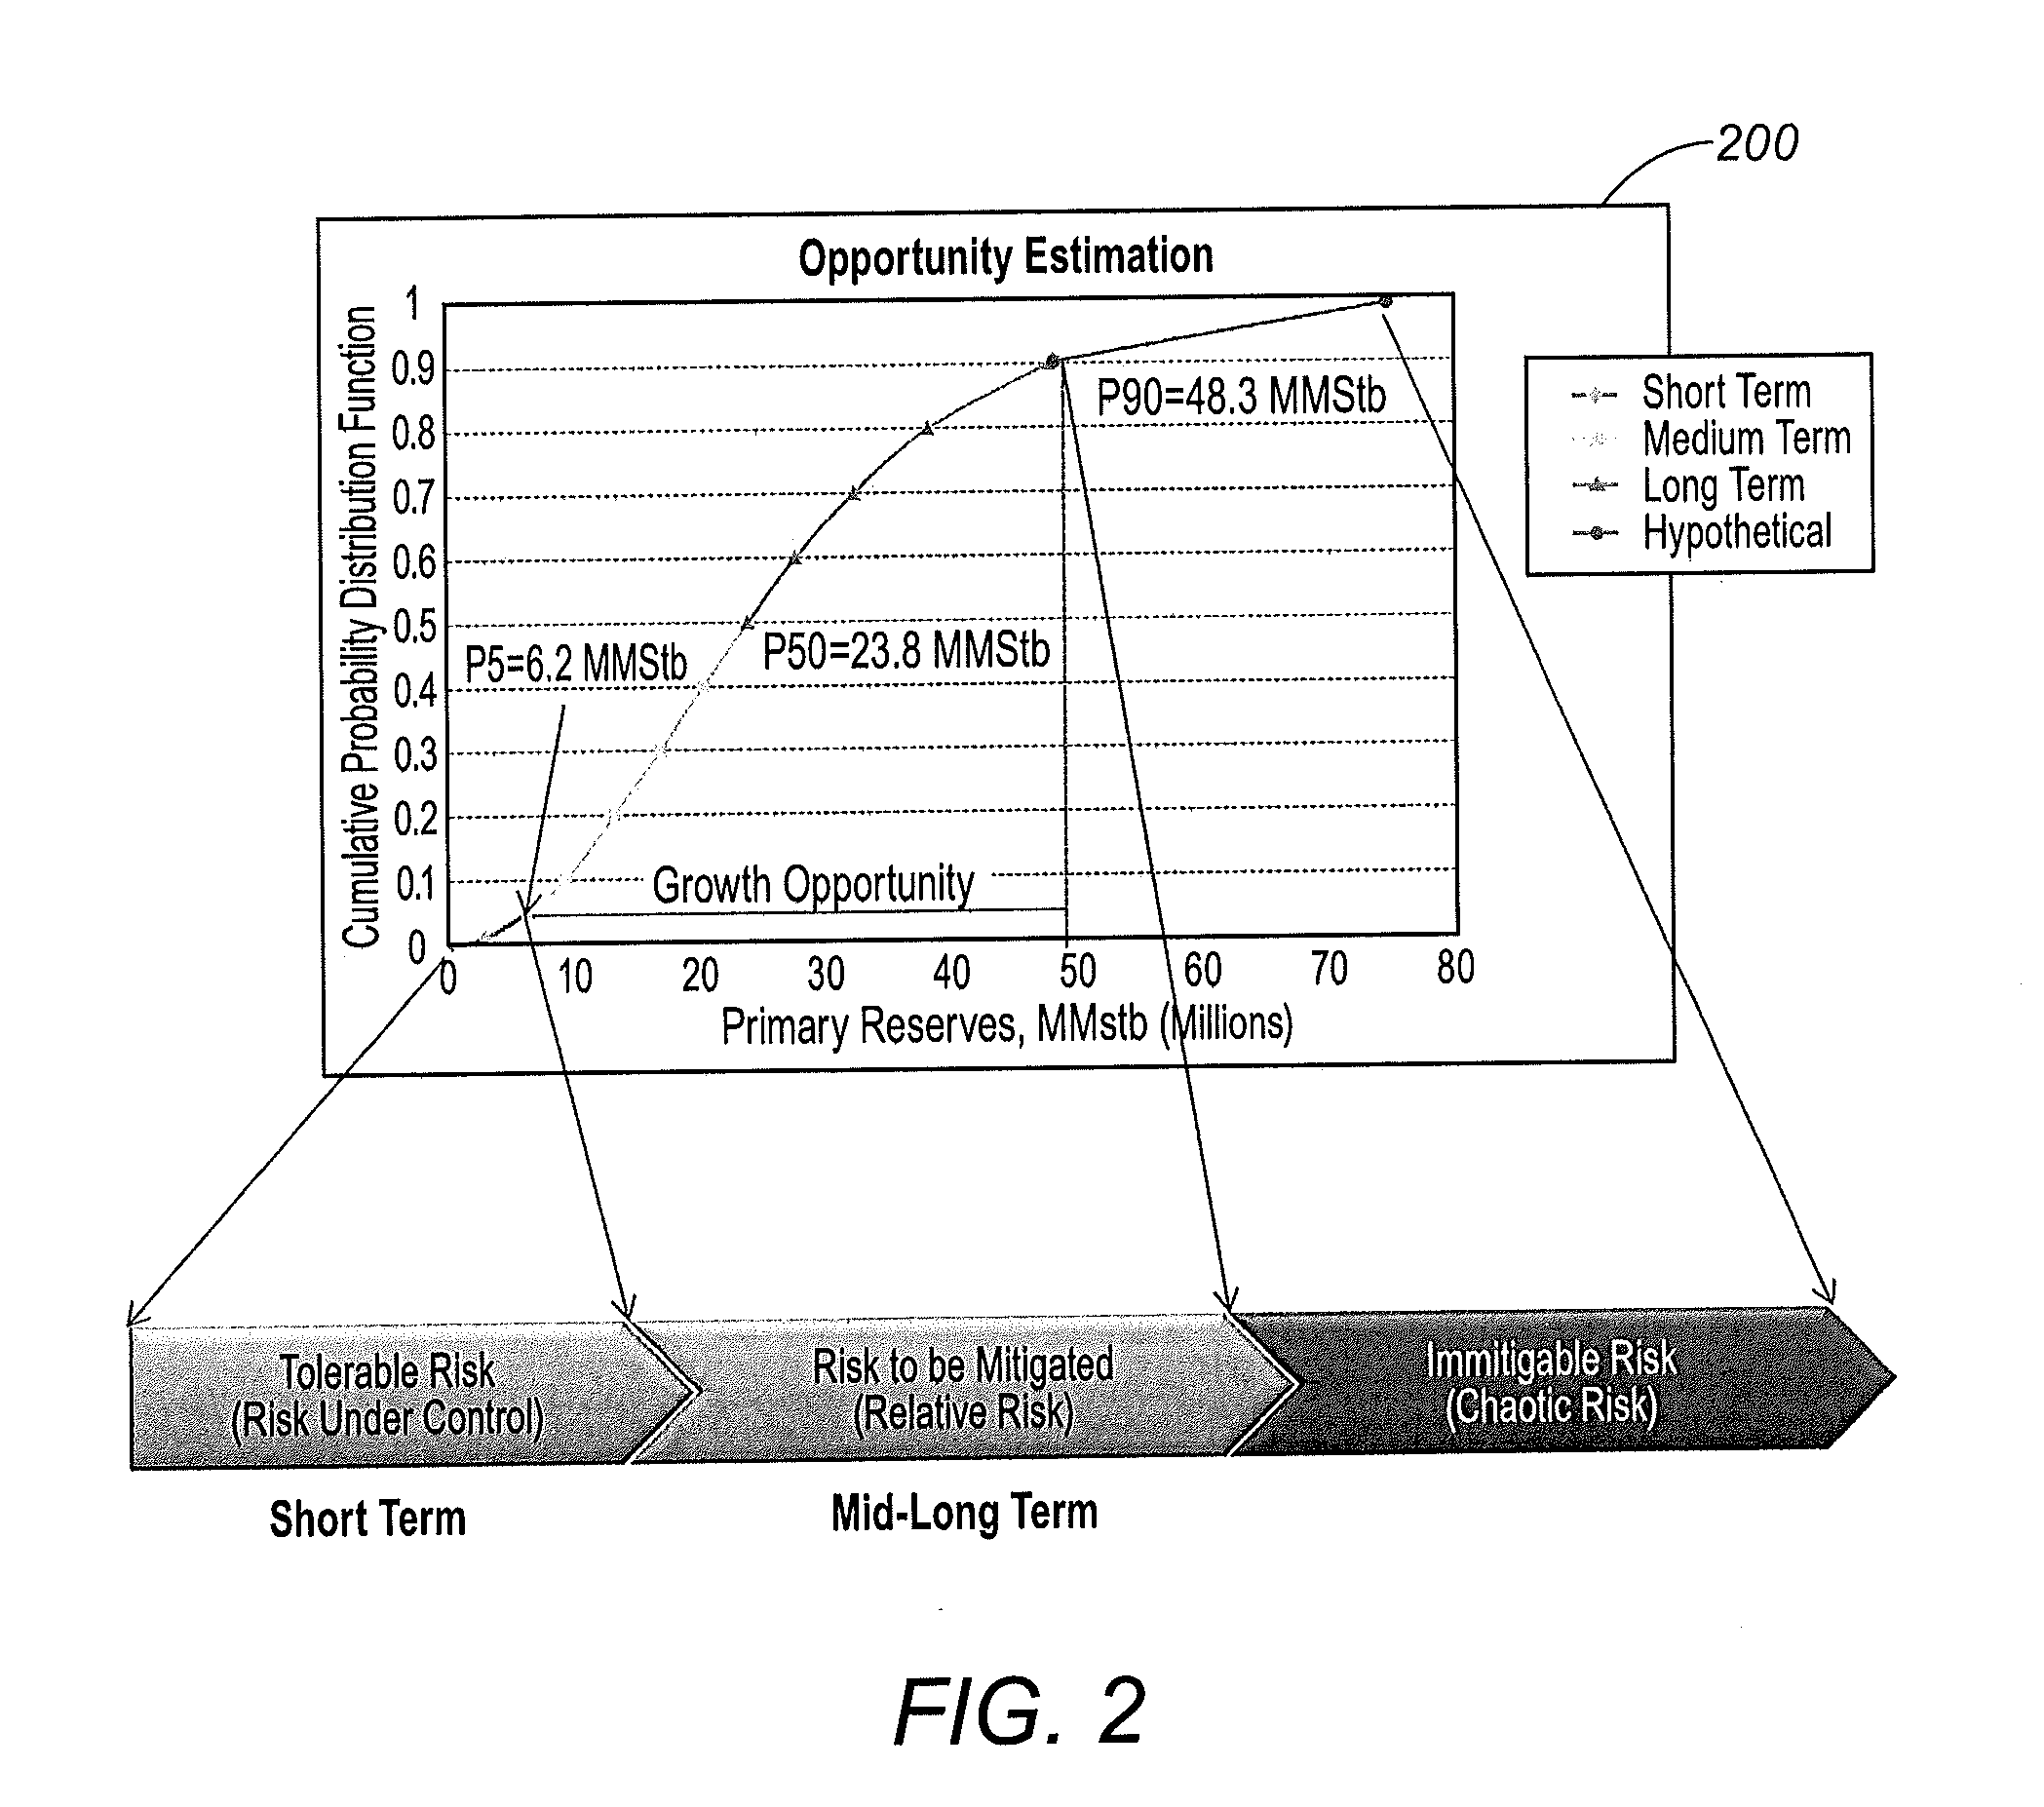 Systems and Methods for Estimating Opportunity in a Reservoir System